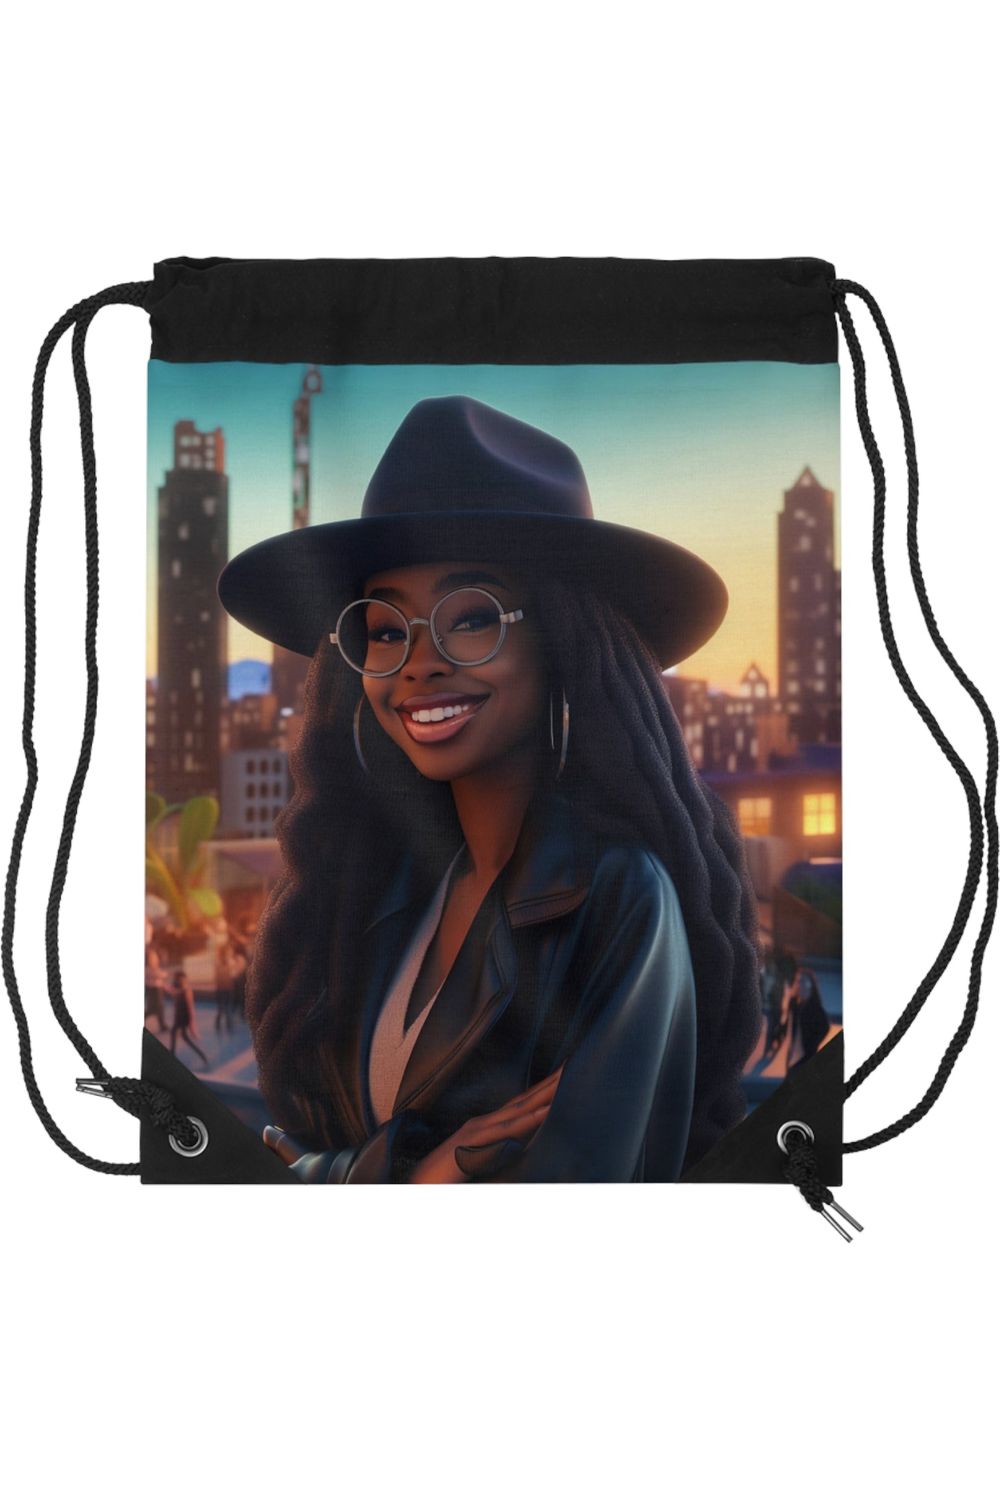 African American Girl with Glasses Drawstring Bag - NicholesGifts.online